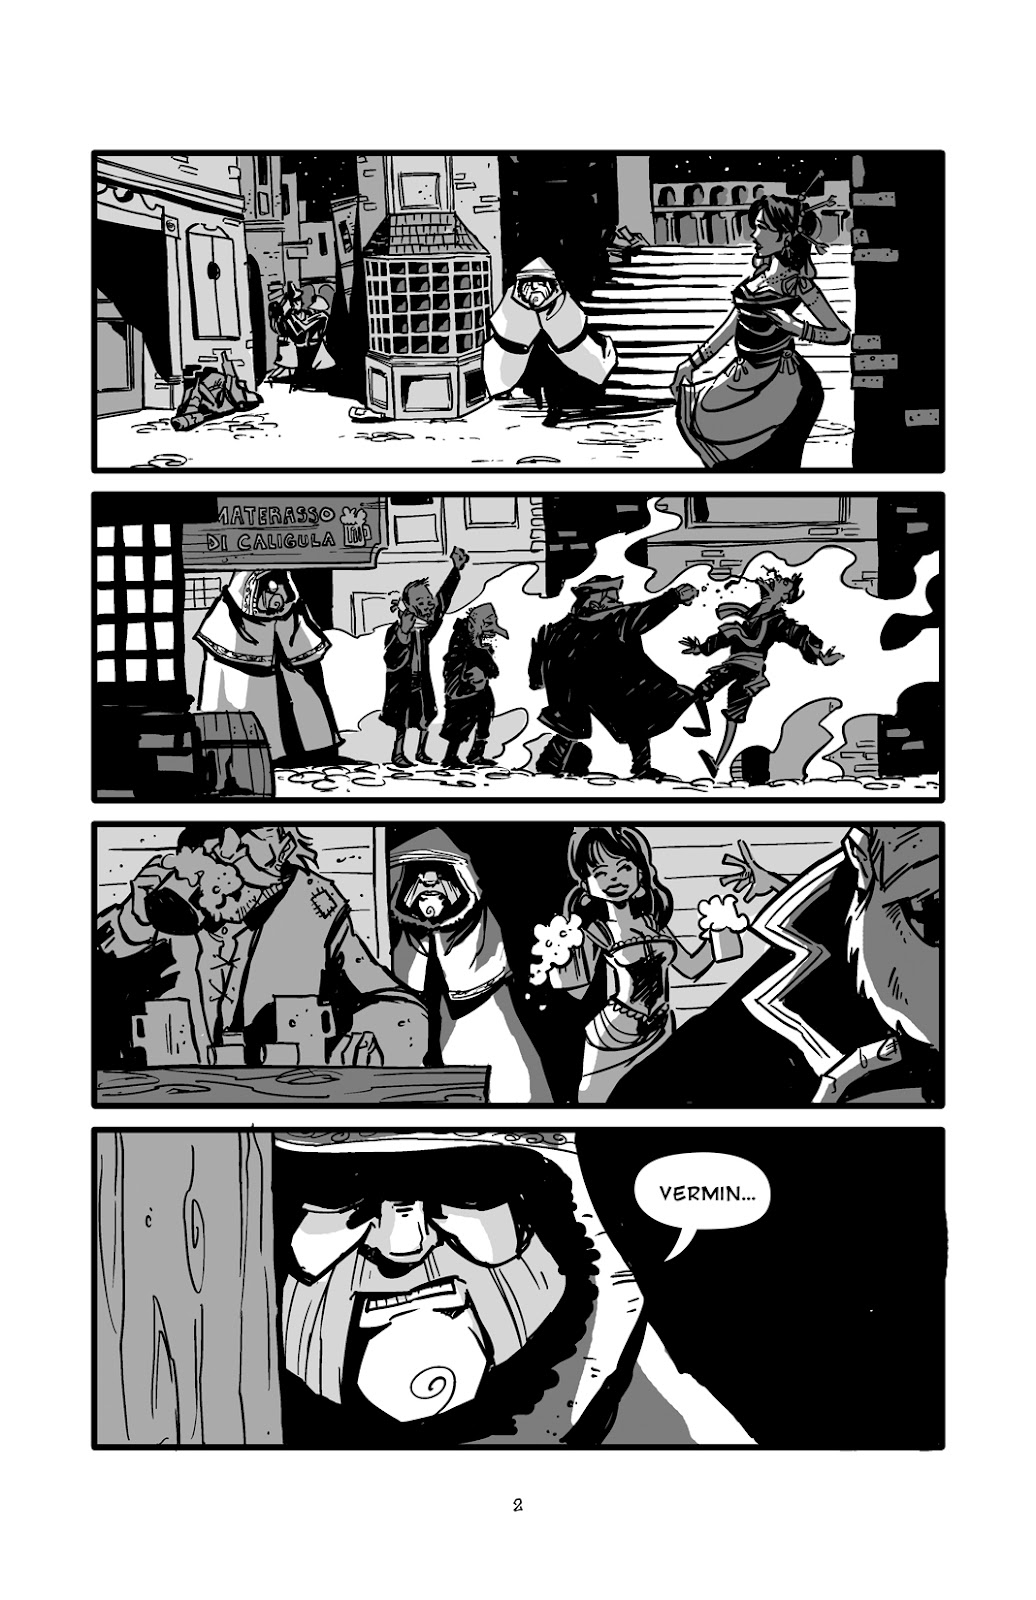 Pinocchio: Vampire Slayer - Of Wood and Blood issue 1 - Page 3